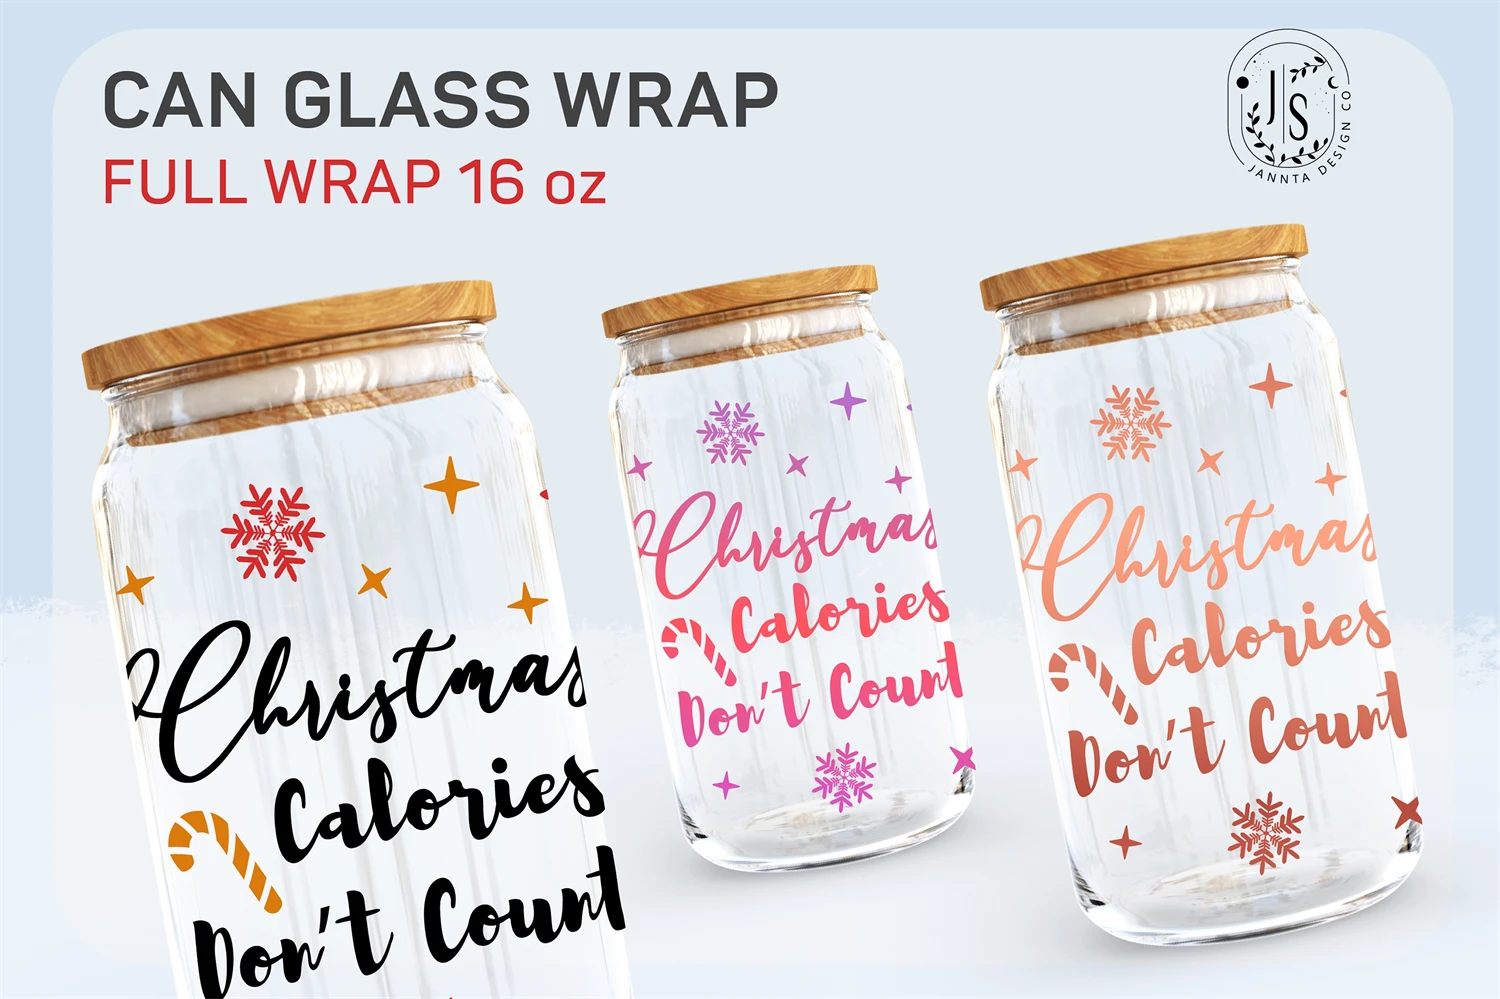 Christmas Calories Don't Count Cookie Jar Christmas -  in 2023